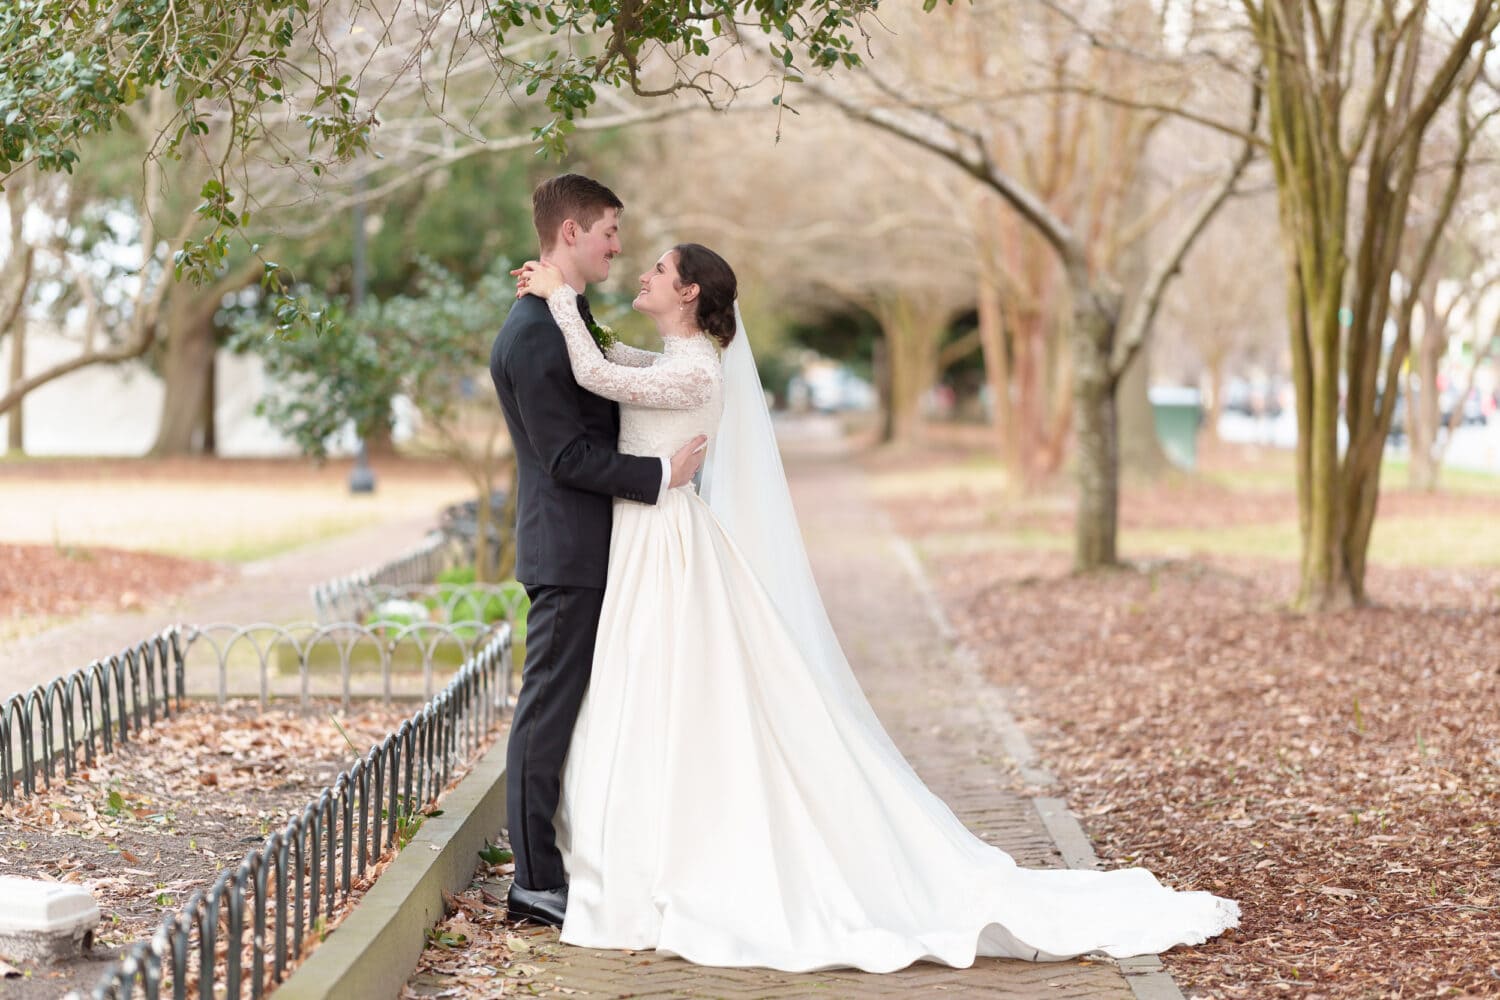 Bride and groom smiling at each other on the brick path - Marion Square Charleston